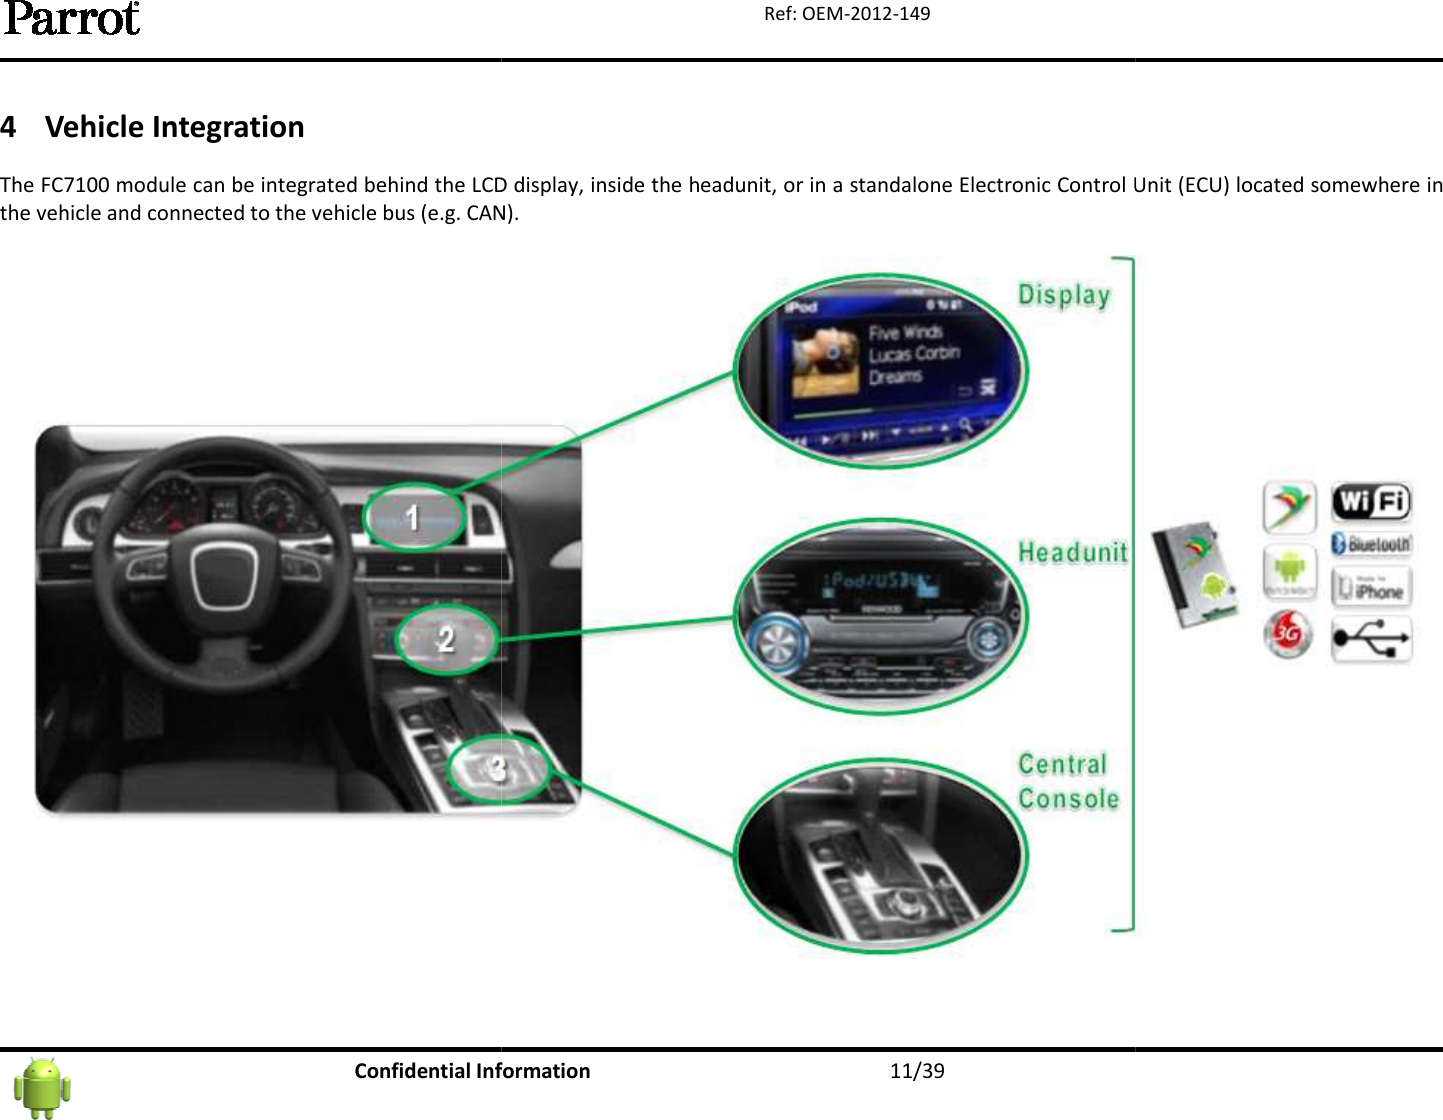   Confidential Information4 Vehicle Integration The FC7100 module can be integrated behind the LCD display, inside the headunit, or in a standalone Electronic Control Unit (ECU) locatethe vehicle and connected to the vehicle bus (e.g. CAN). Information  11/39 Ref: OEM-2012-149 module can be integrated behind the LCD display, inside the headunit, or in a standalone Electronic Control Unit (ECU) locatennected to the vehicle bus (e.g. CAN).   module can be integrated behind the LCD display, inside the headunit, or in a standalone Electronic Control Unit (ECU) located somewhere in  